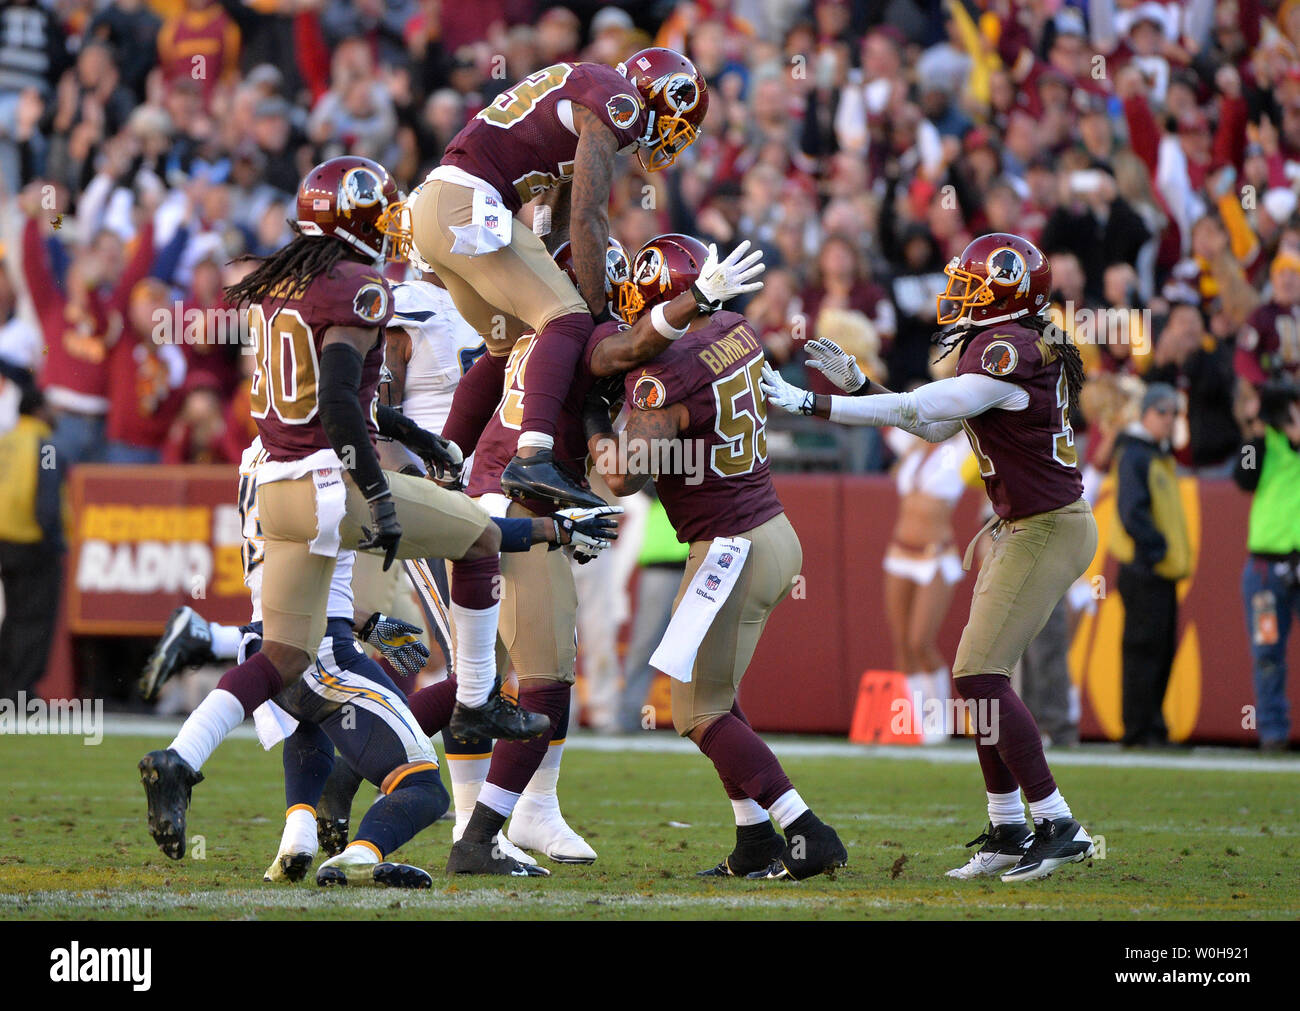 Washington Redskins free safety David Amerson (39) celebrates with teammate after intercepting a ball in the fourth quarter against the San Diego Chargers, at FedEx Field in Landover, Maryland on November 3, 2013. The Redskins defeated the Chargers 30-24. UPI/Kevin Dietsch Stock Photo